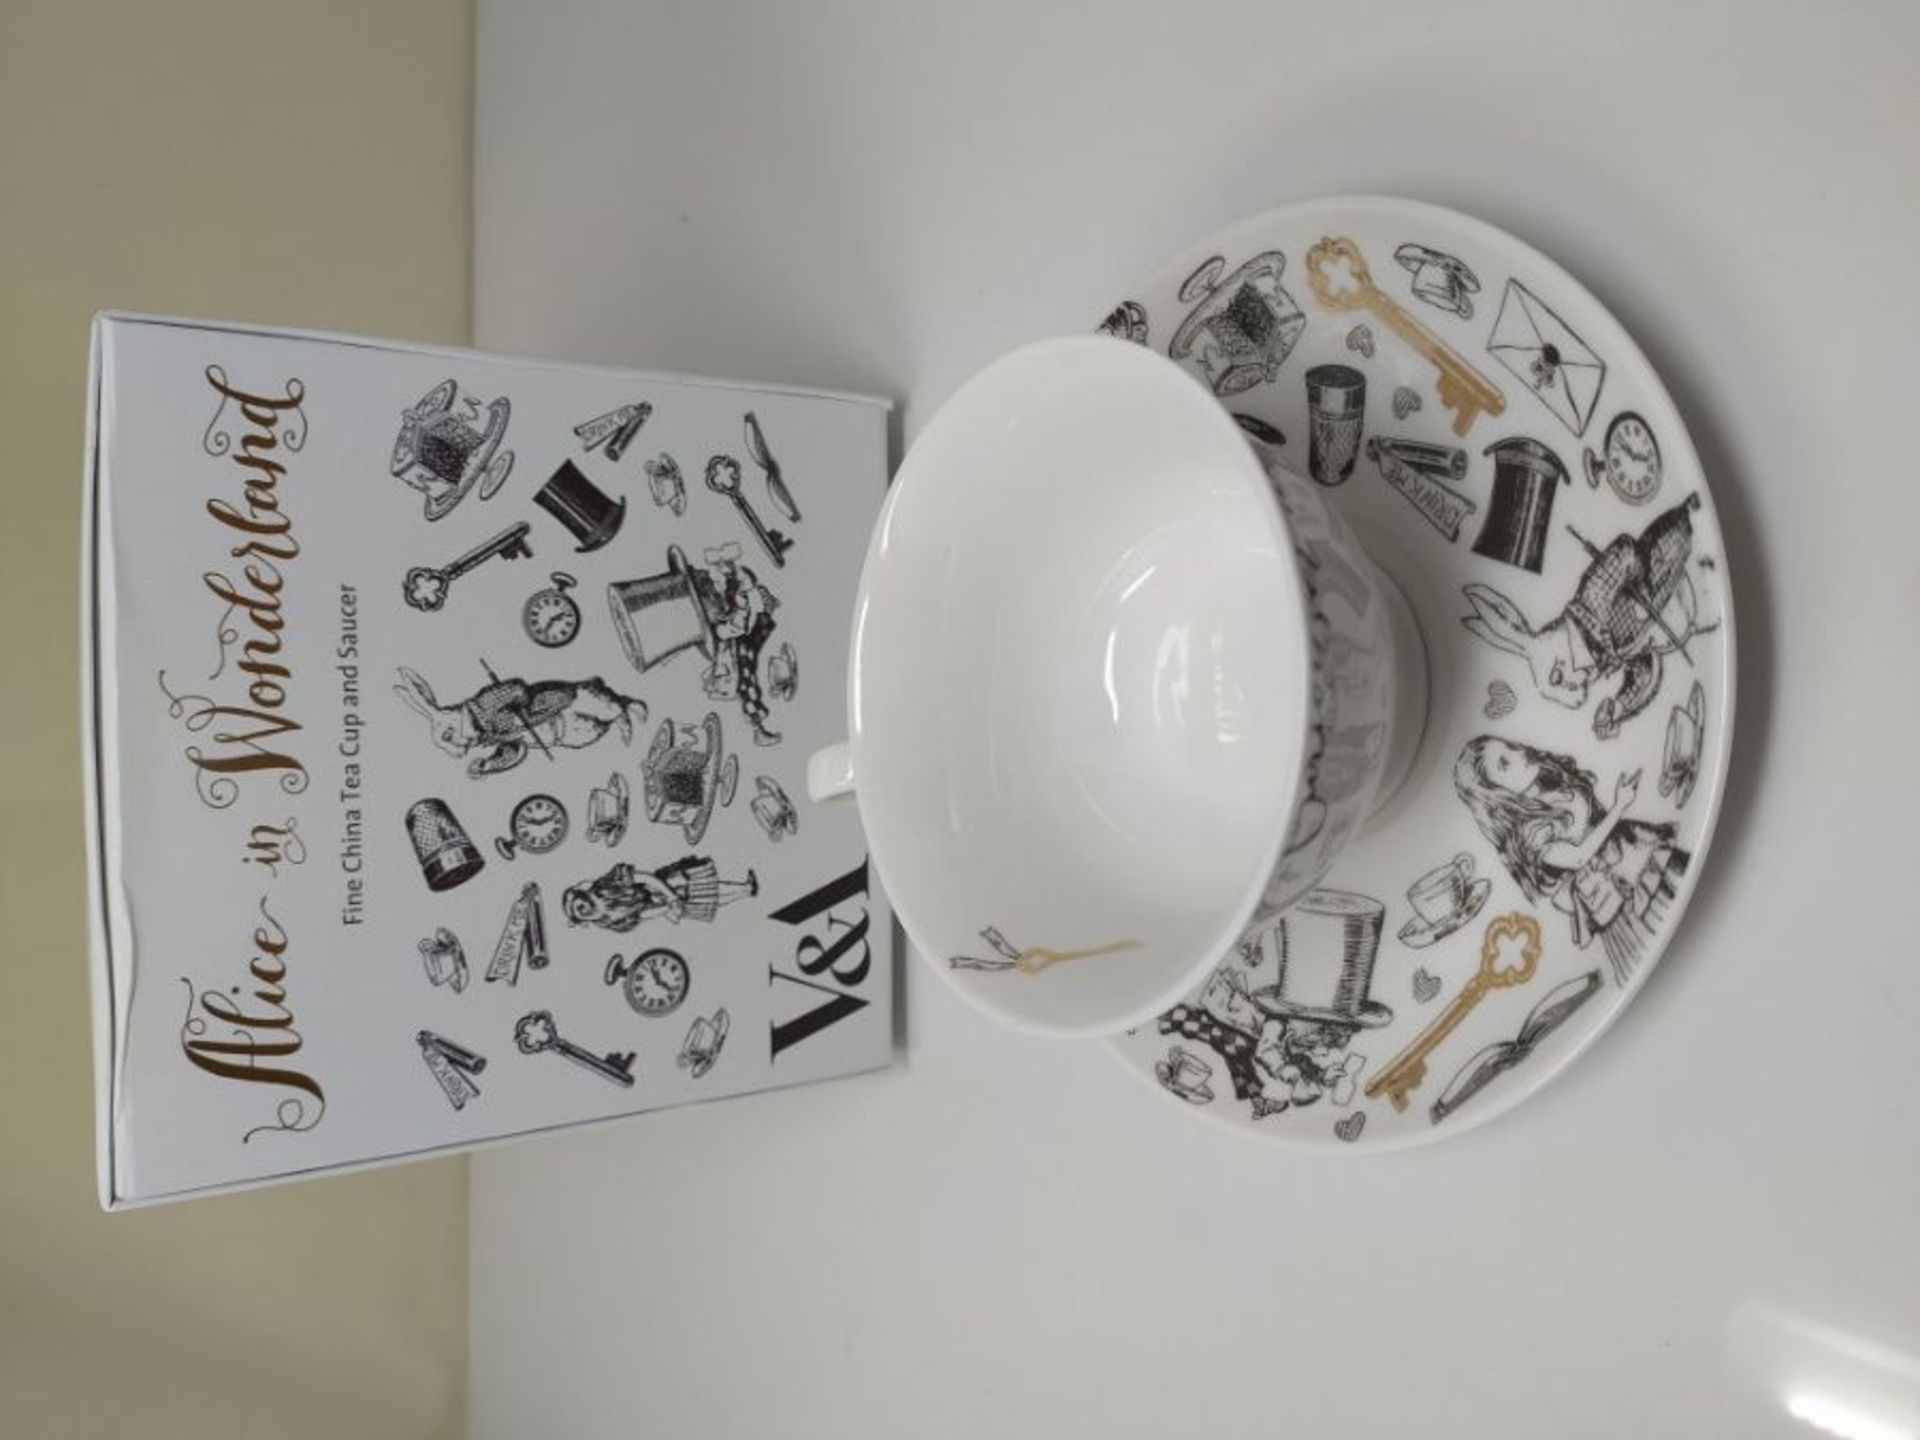 V&A 5200018 Alice in Wonderland Cup and Saucer, 210 ml (7 fl oz), White - Image 2 of 2